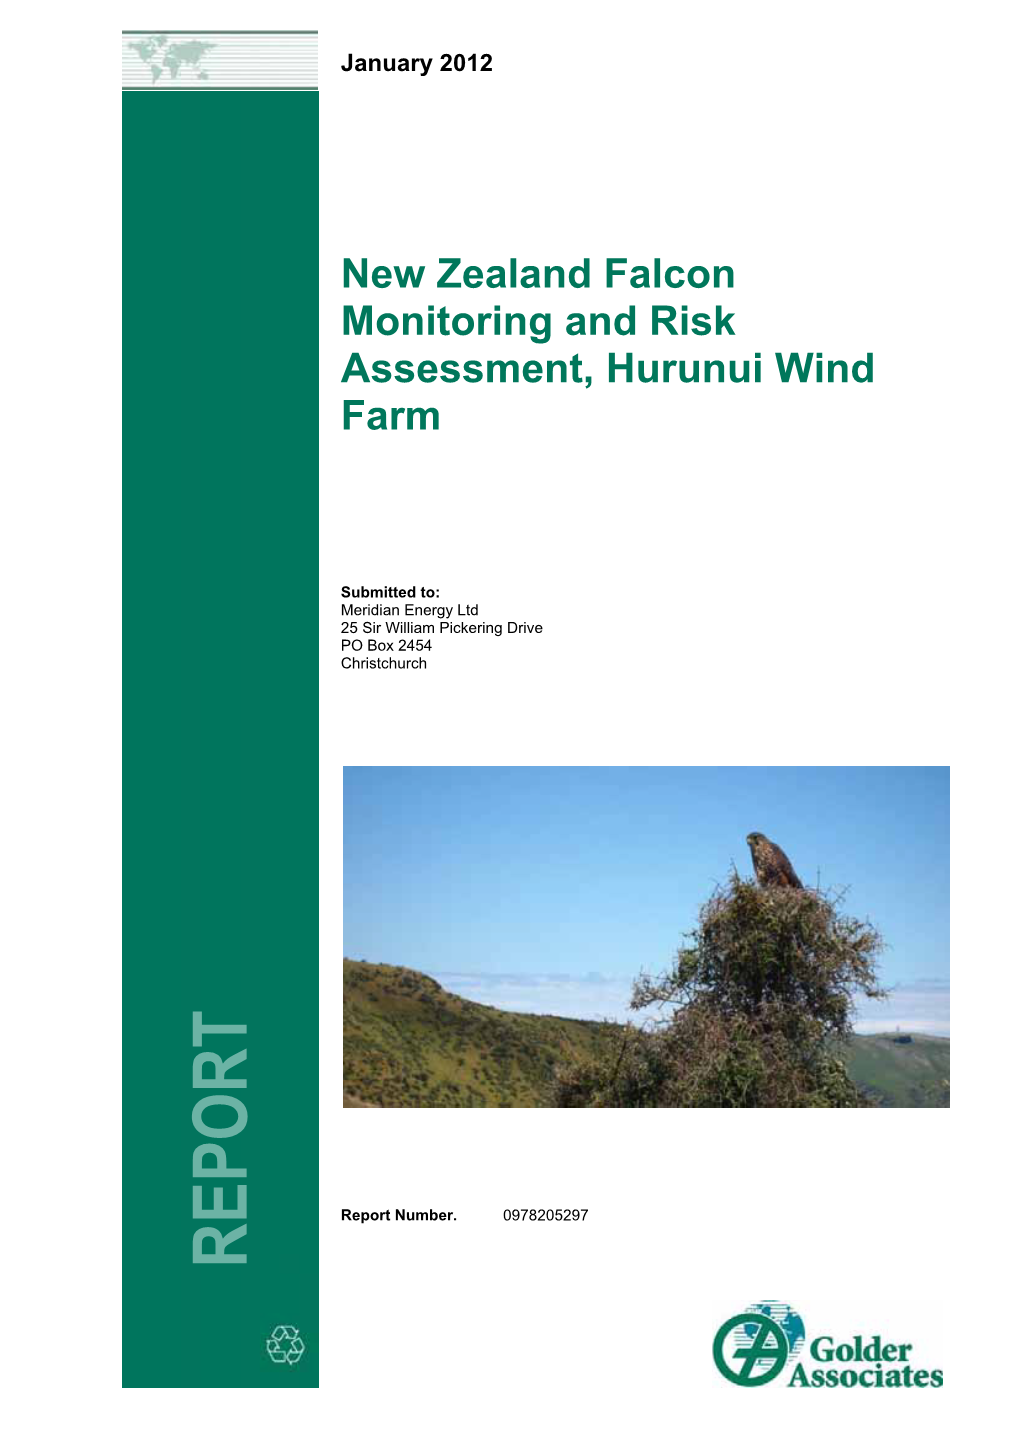 New Zealand Falcon Monitoring and Risk Assessment, Hurunui Wind Farm